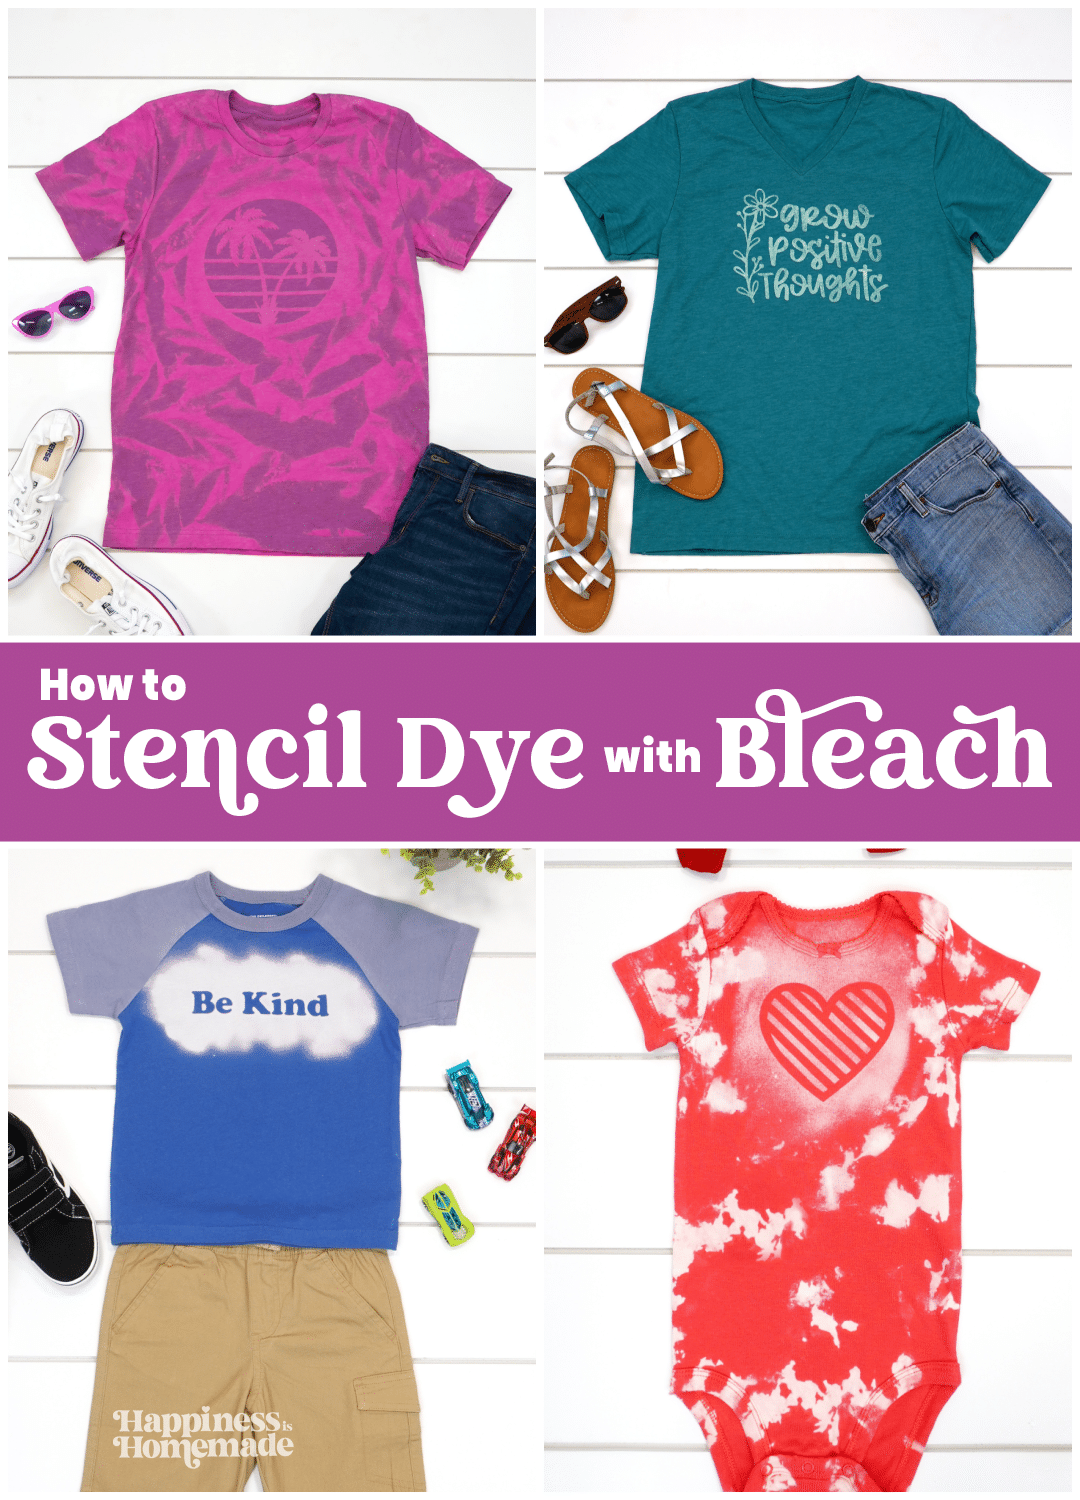 "How to Stencil Dye with Bleach" graphic with collage of four bleach stenciled shirt designs